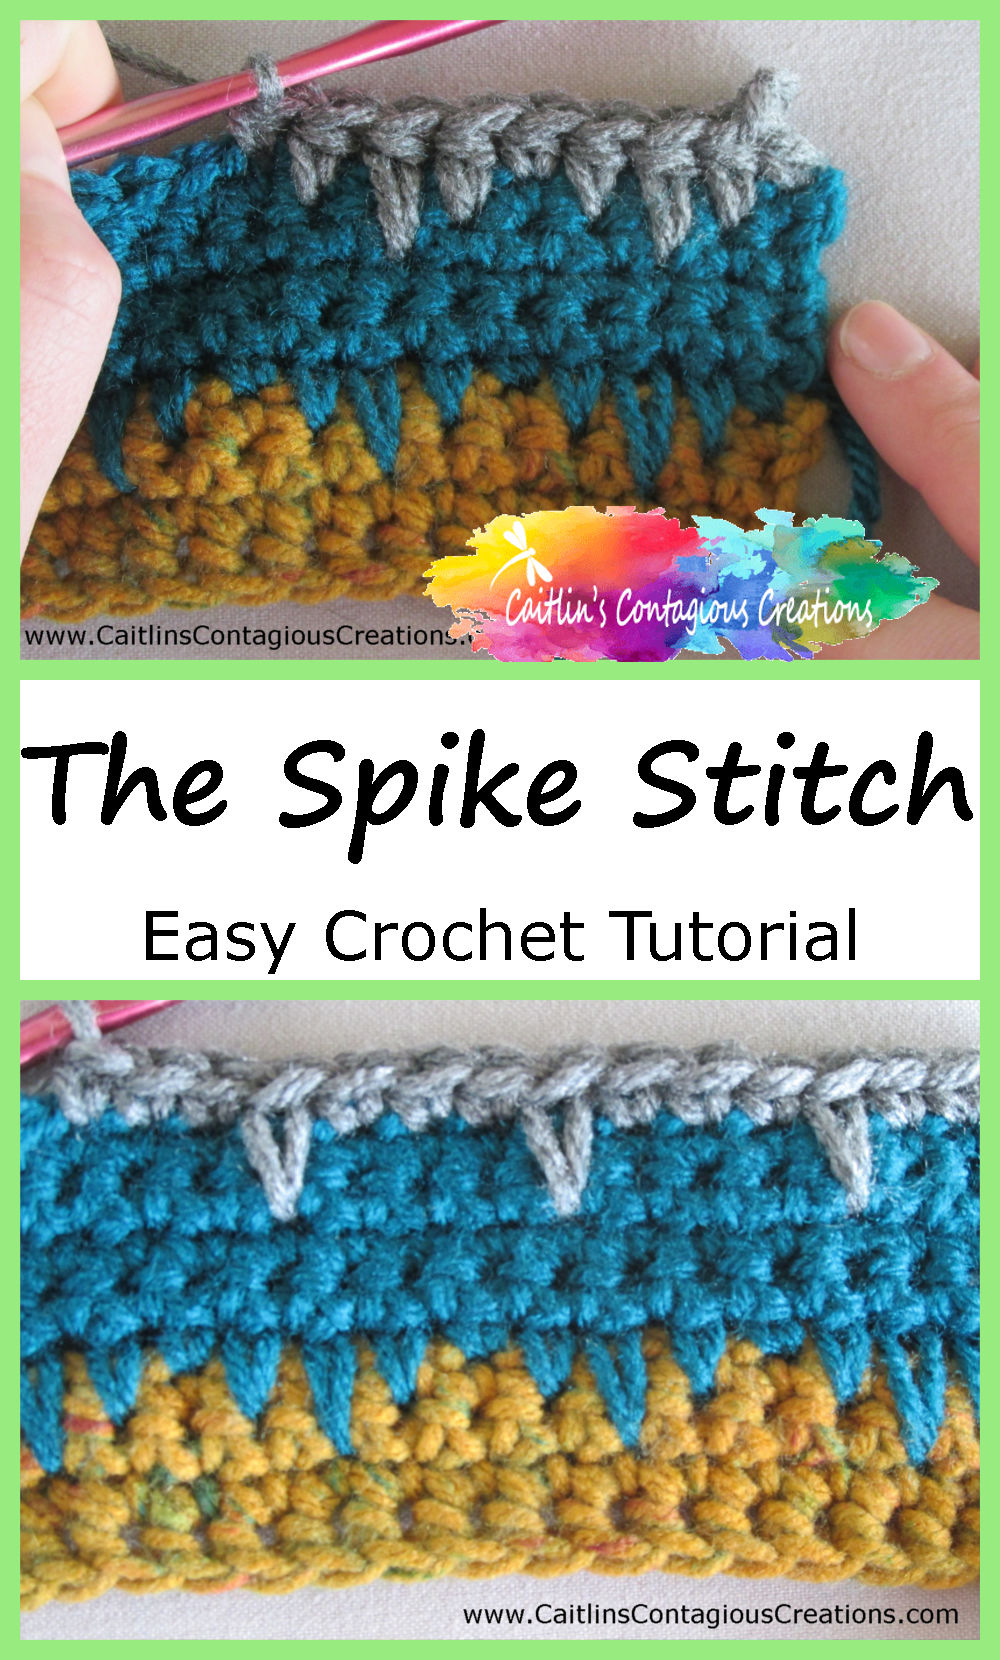 This free crochet stitch tutorial from Caitlin's Contagious Creations teaches the Spike Stitch. An easy crochet stitch that helps beginners learn beyond basics. Learn to crochet a new, fun stitch with an easy to follow crochet lesson. #FreeCrochetGuide #EasyCrochetLesson #SpikeStitchTutorial